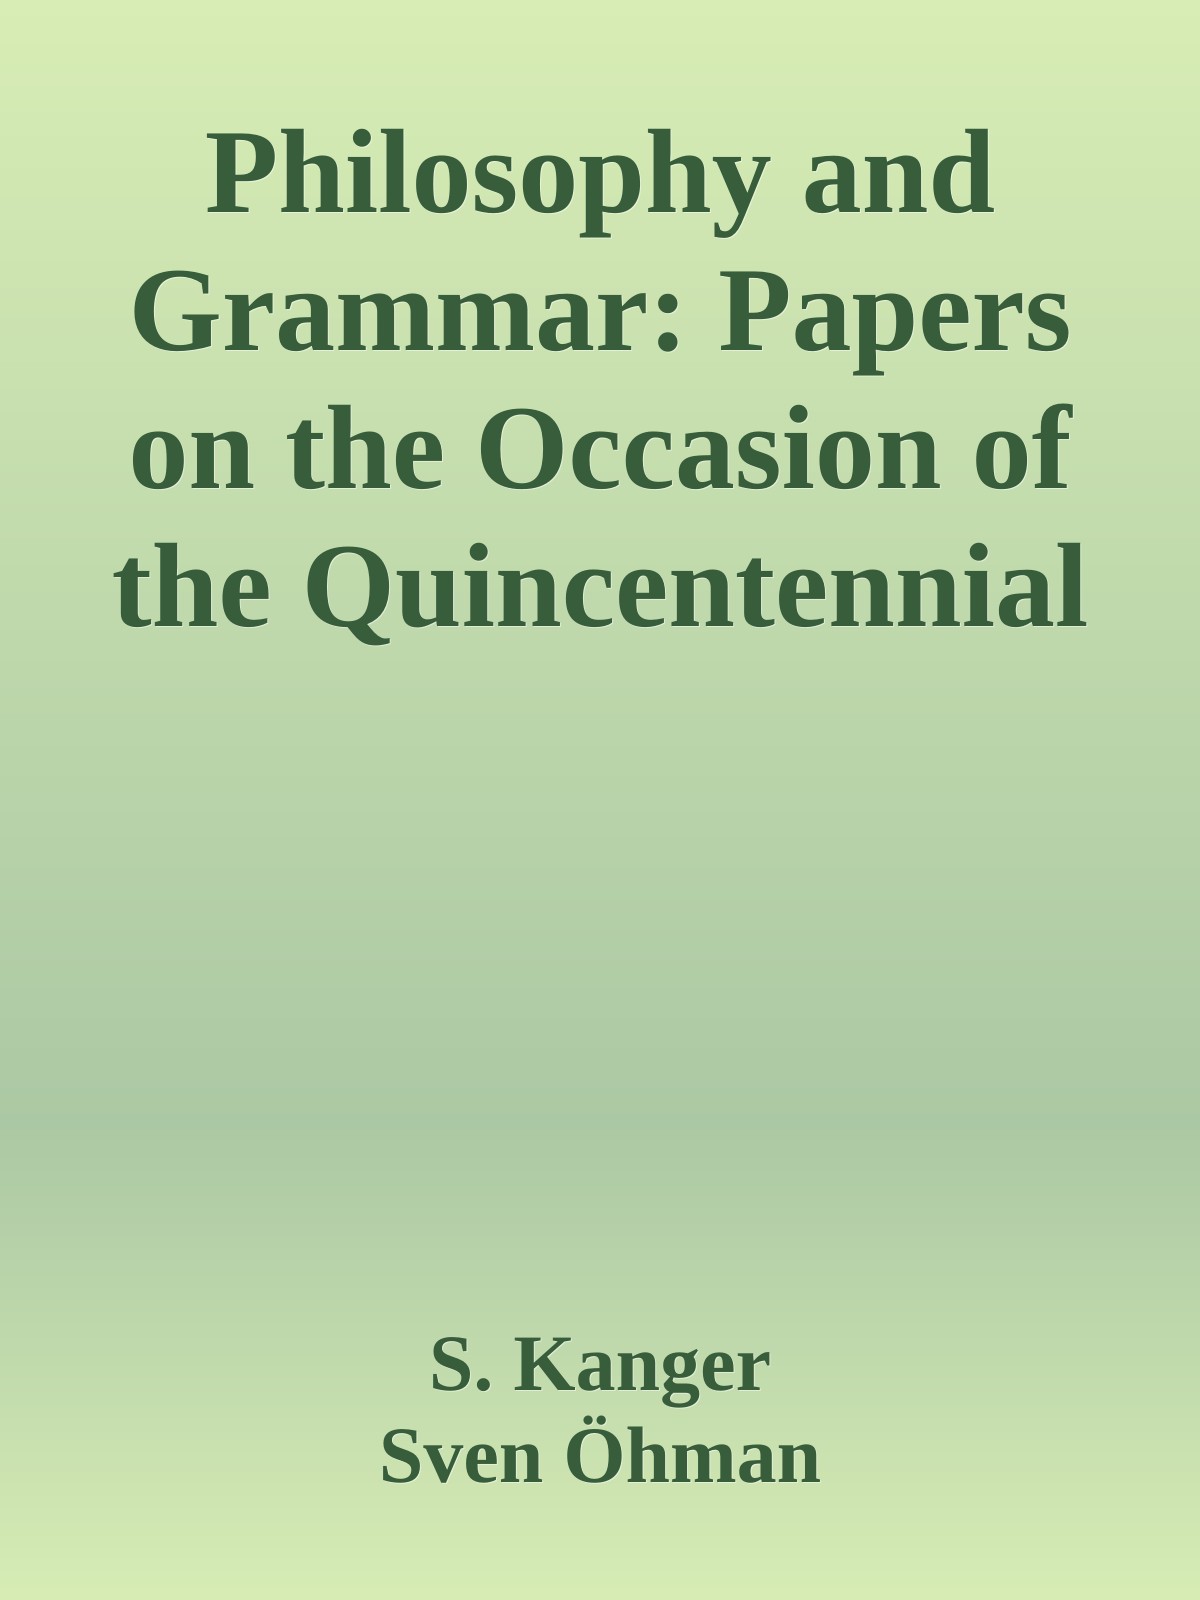 Philosophy and Grammar: Papers on the Occasion of the Quincentennial of Uppsala University